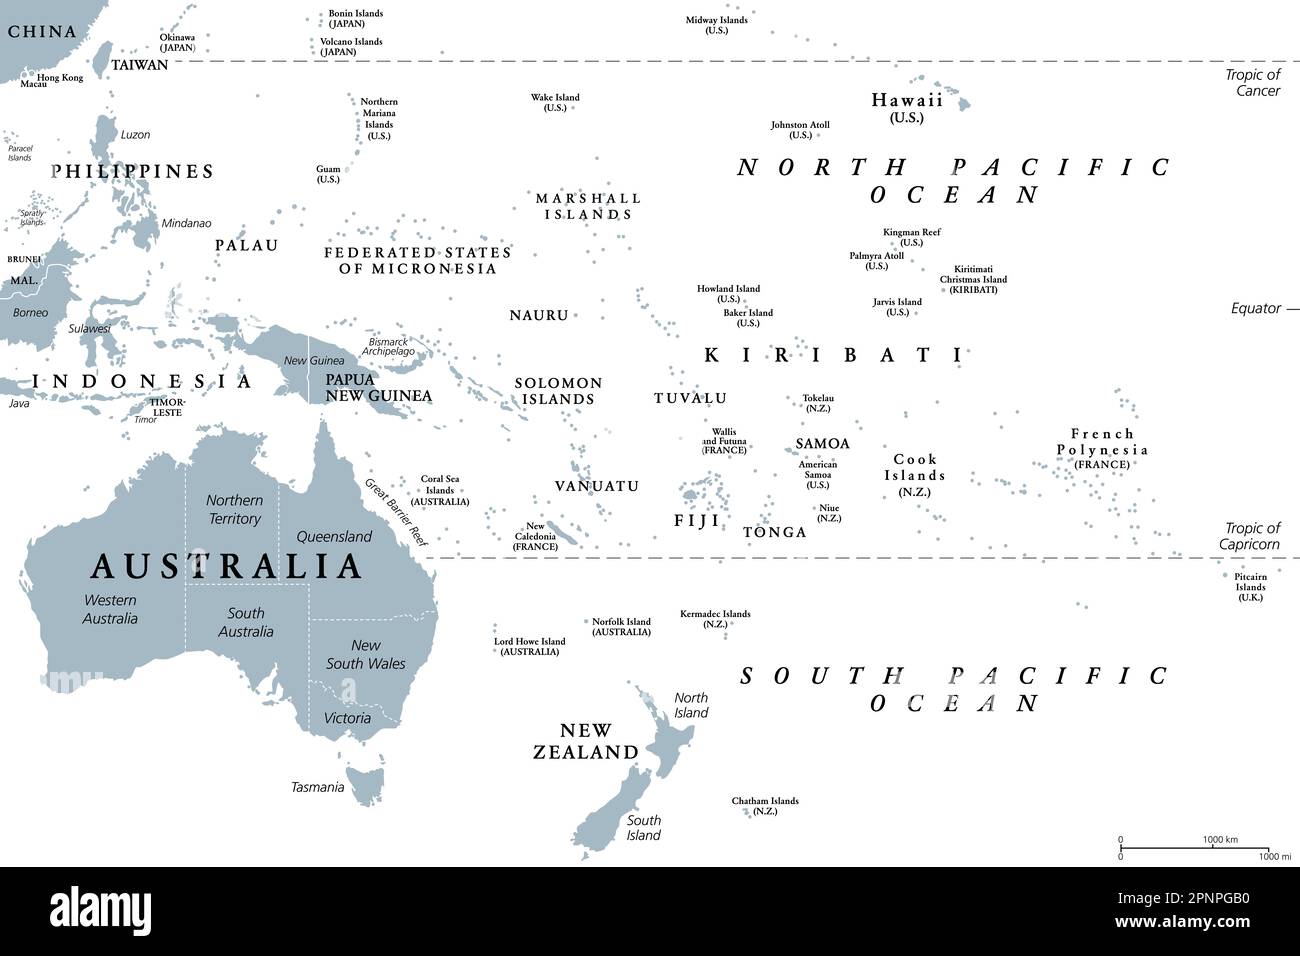 Oceania, gray political map. Australia and the Pacific, including New Zealand. Geographic region, southeast of the Asia-Pacific region. Stock Photo